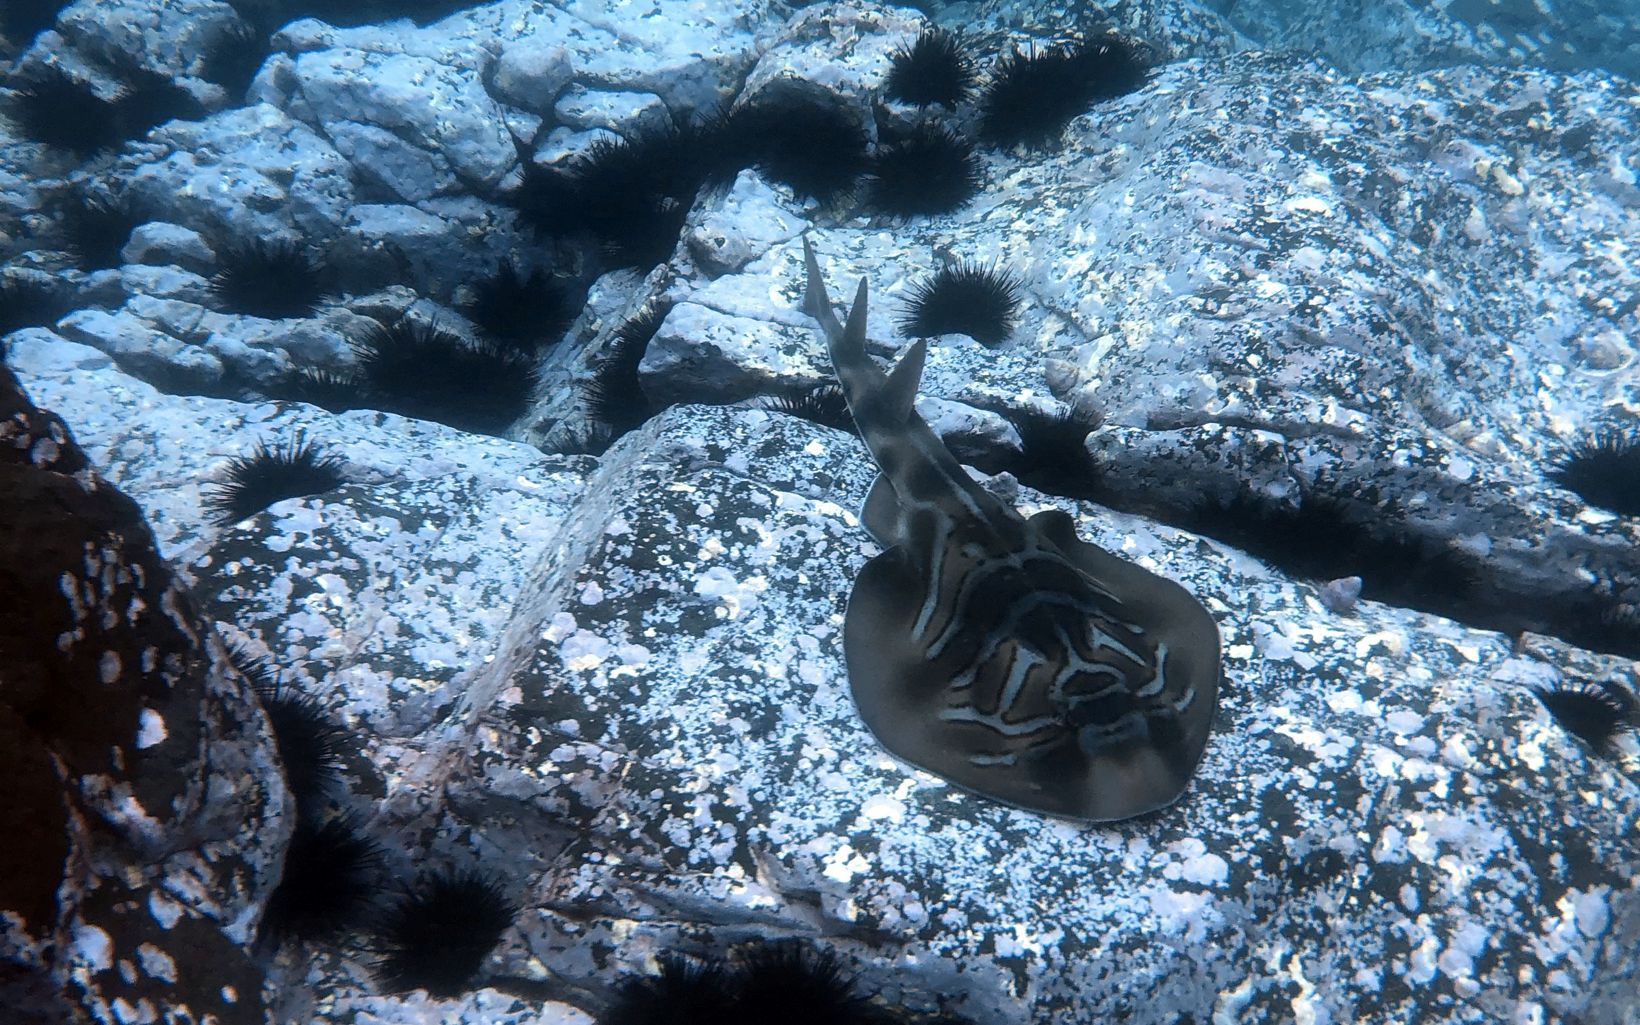 An Eastern Fiddle Ray  resting within an Urchin-barren rocky shore off the coast of Narooma. © Francisco Martinez Beana